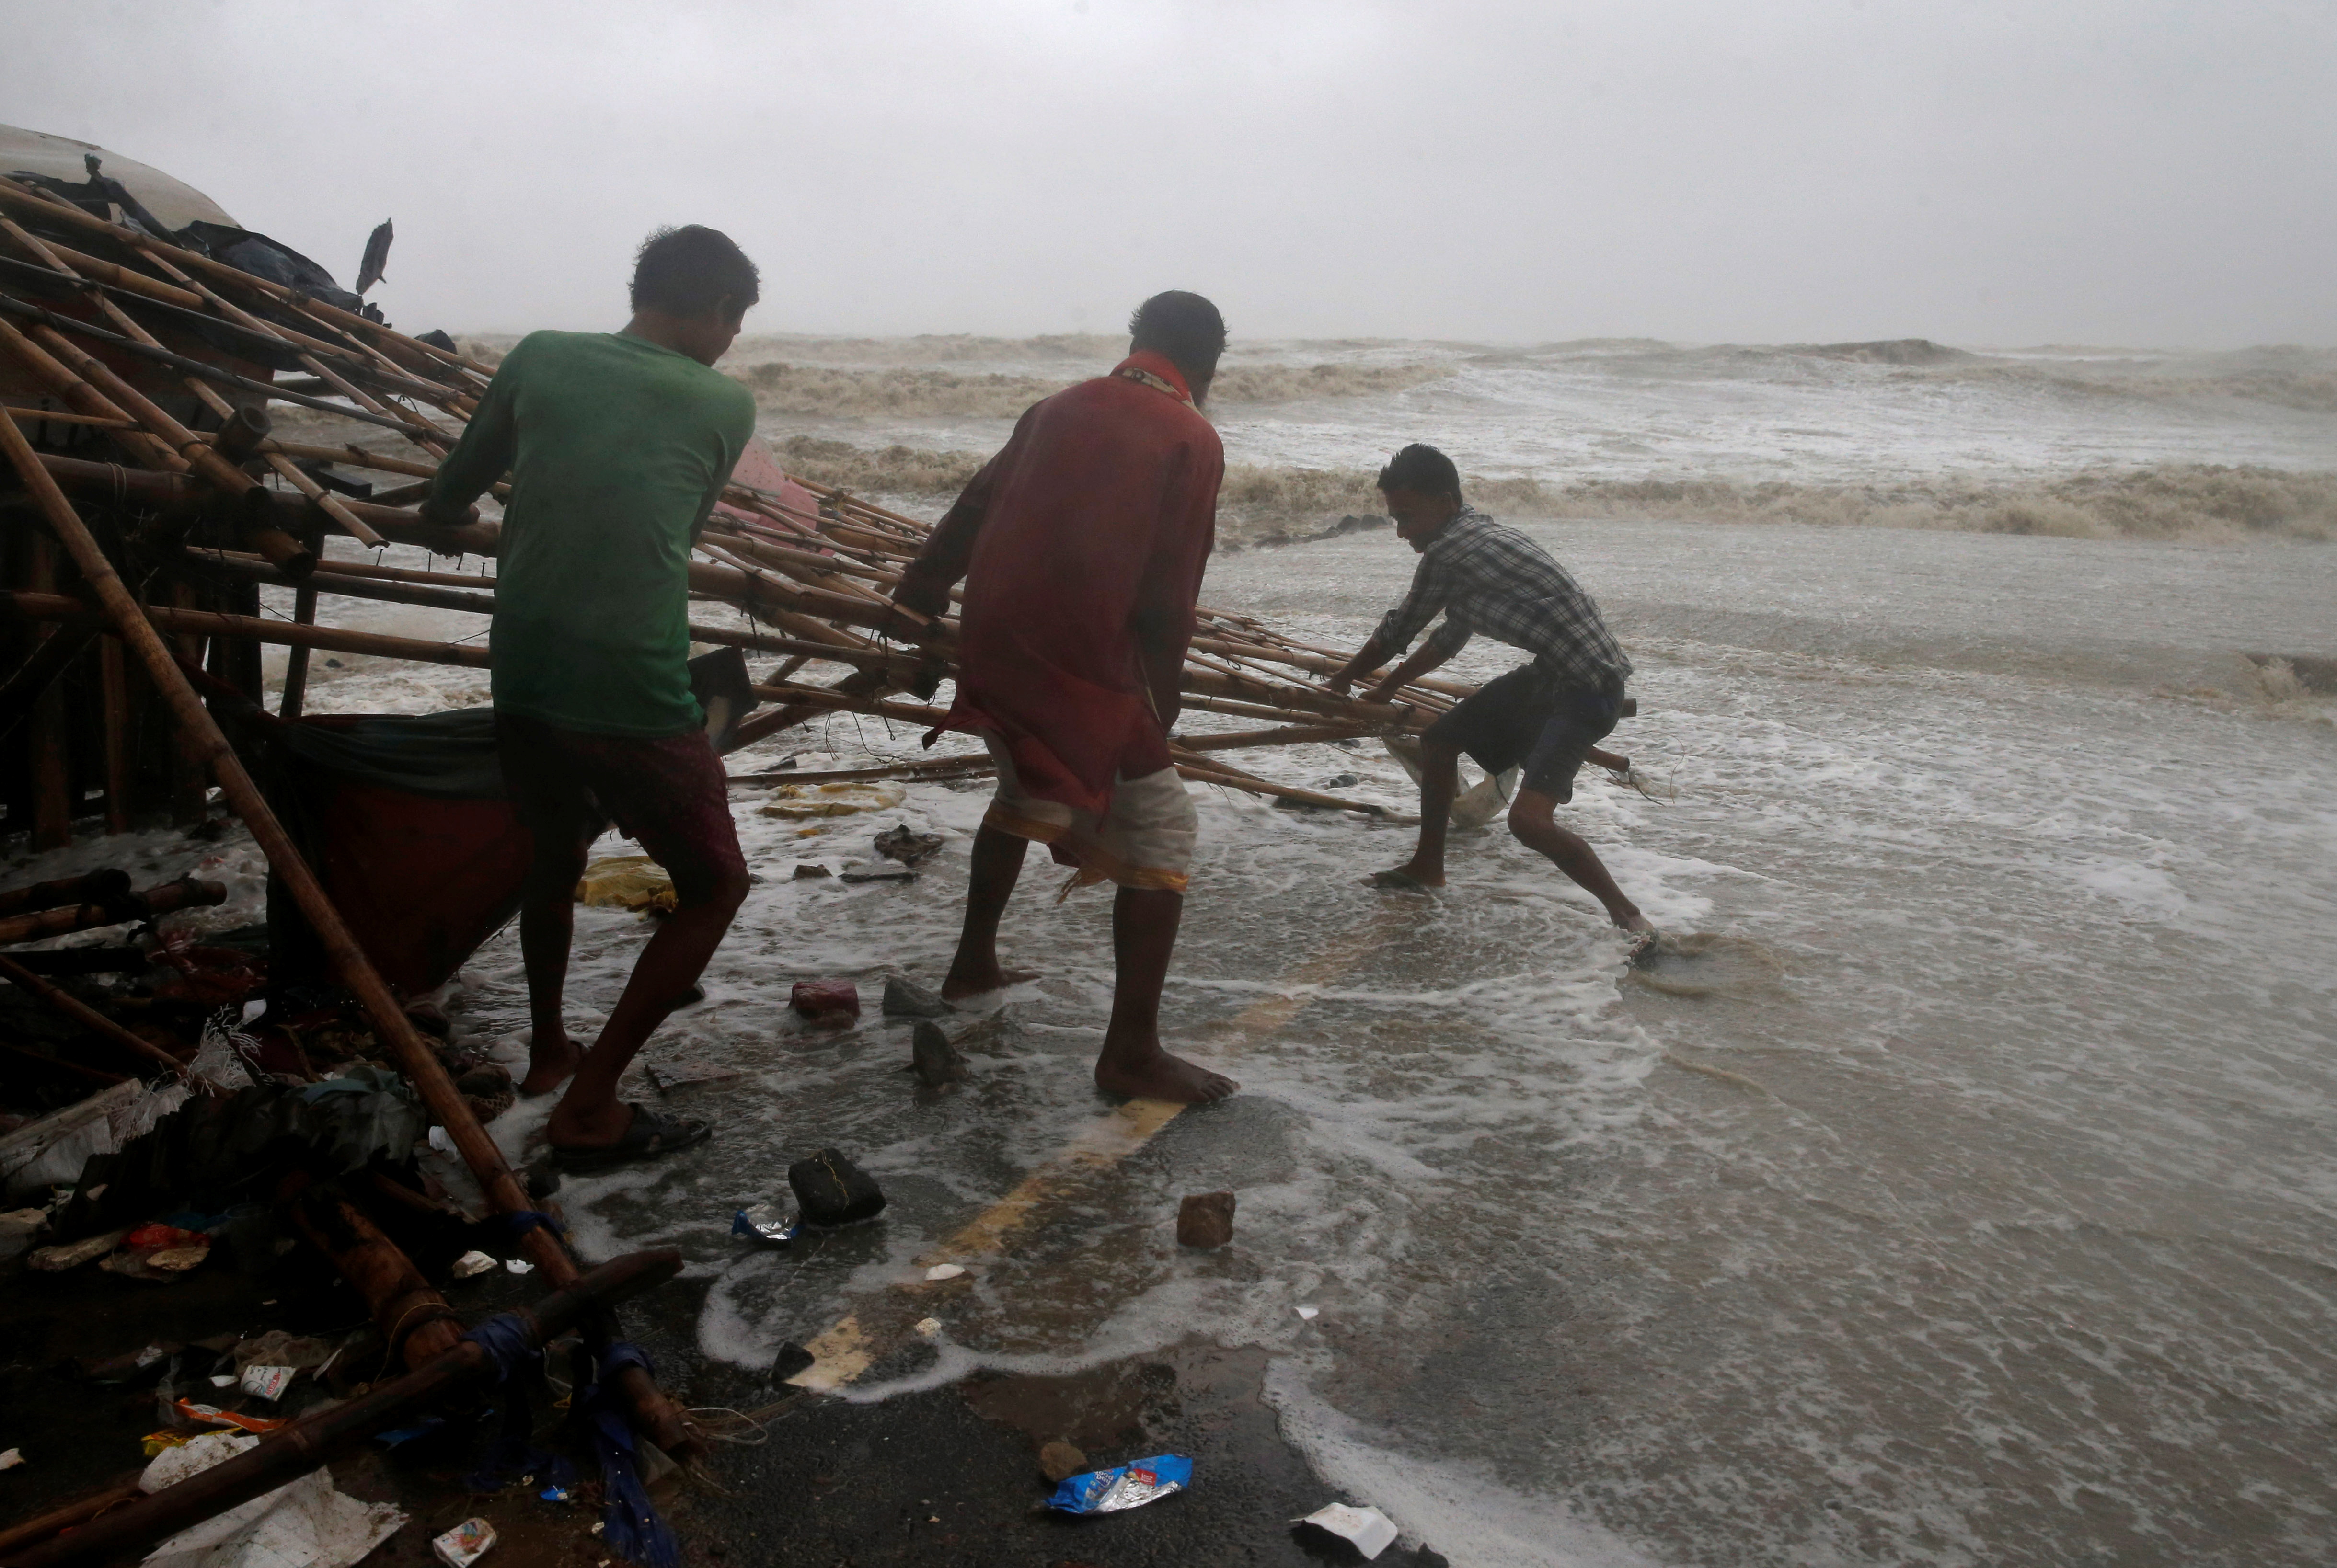 Cyclone Yaas to hit eastern India @ Windy Community